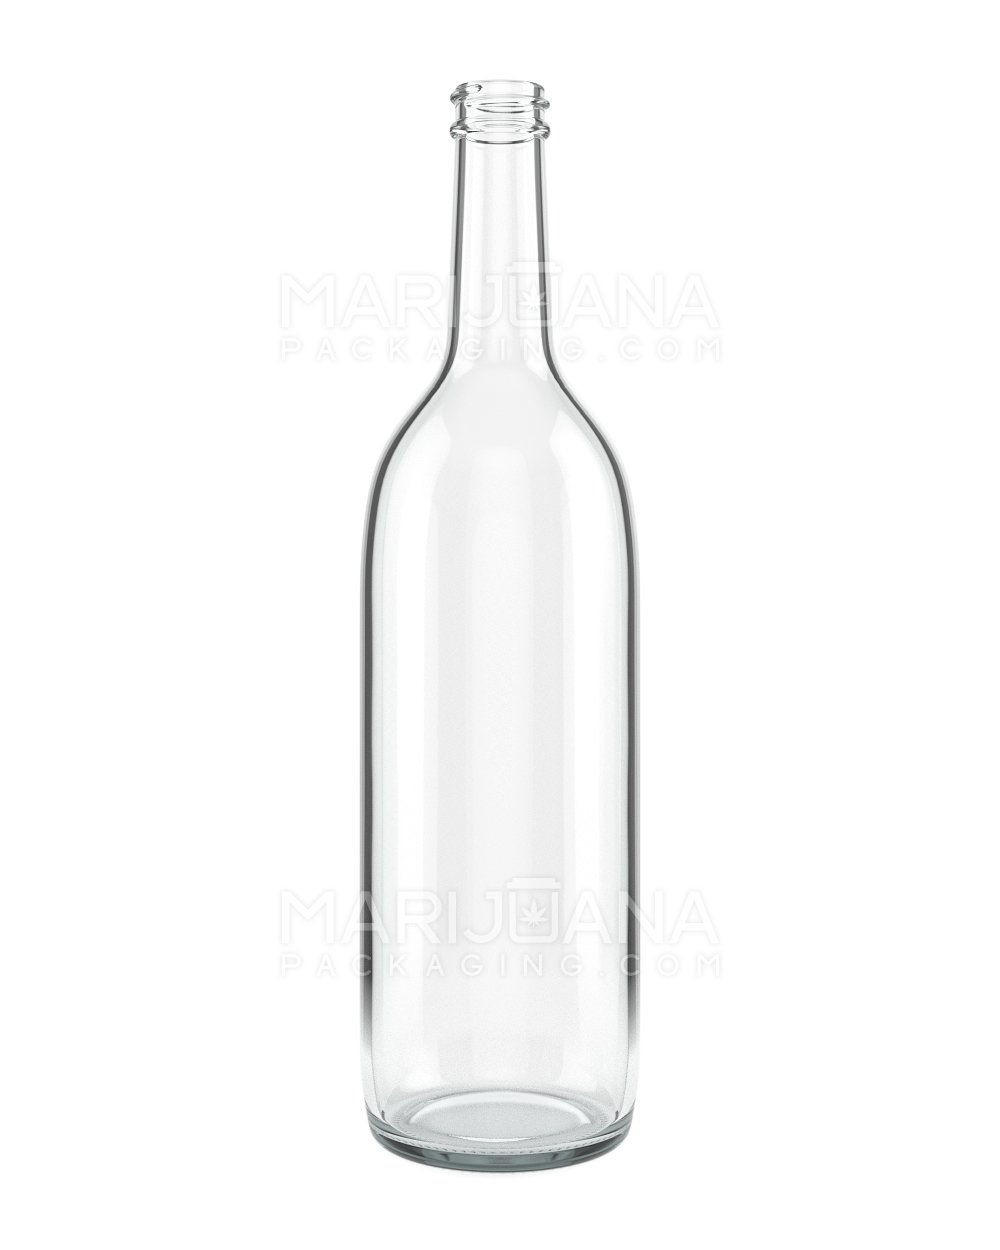 Clear Glass Bottles | 28mm - 750mL - 12 Count - 1